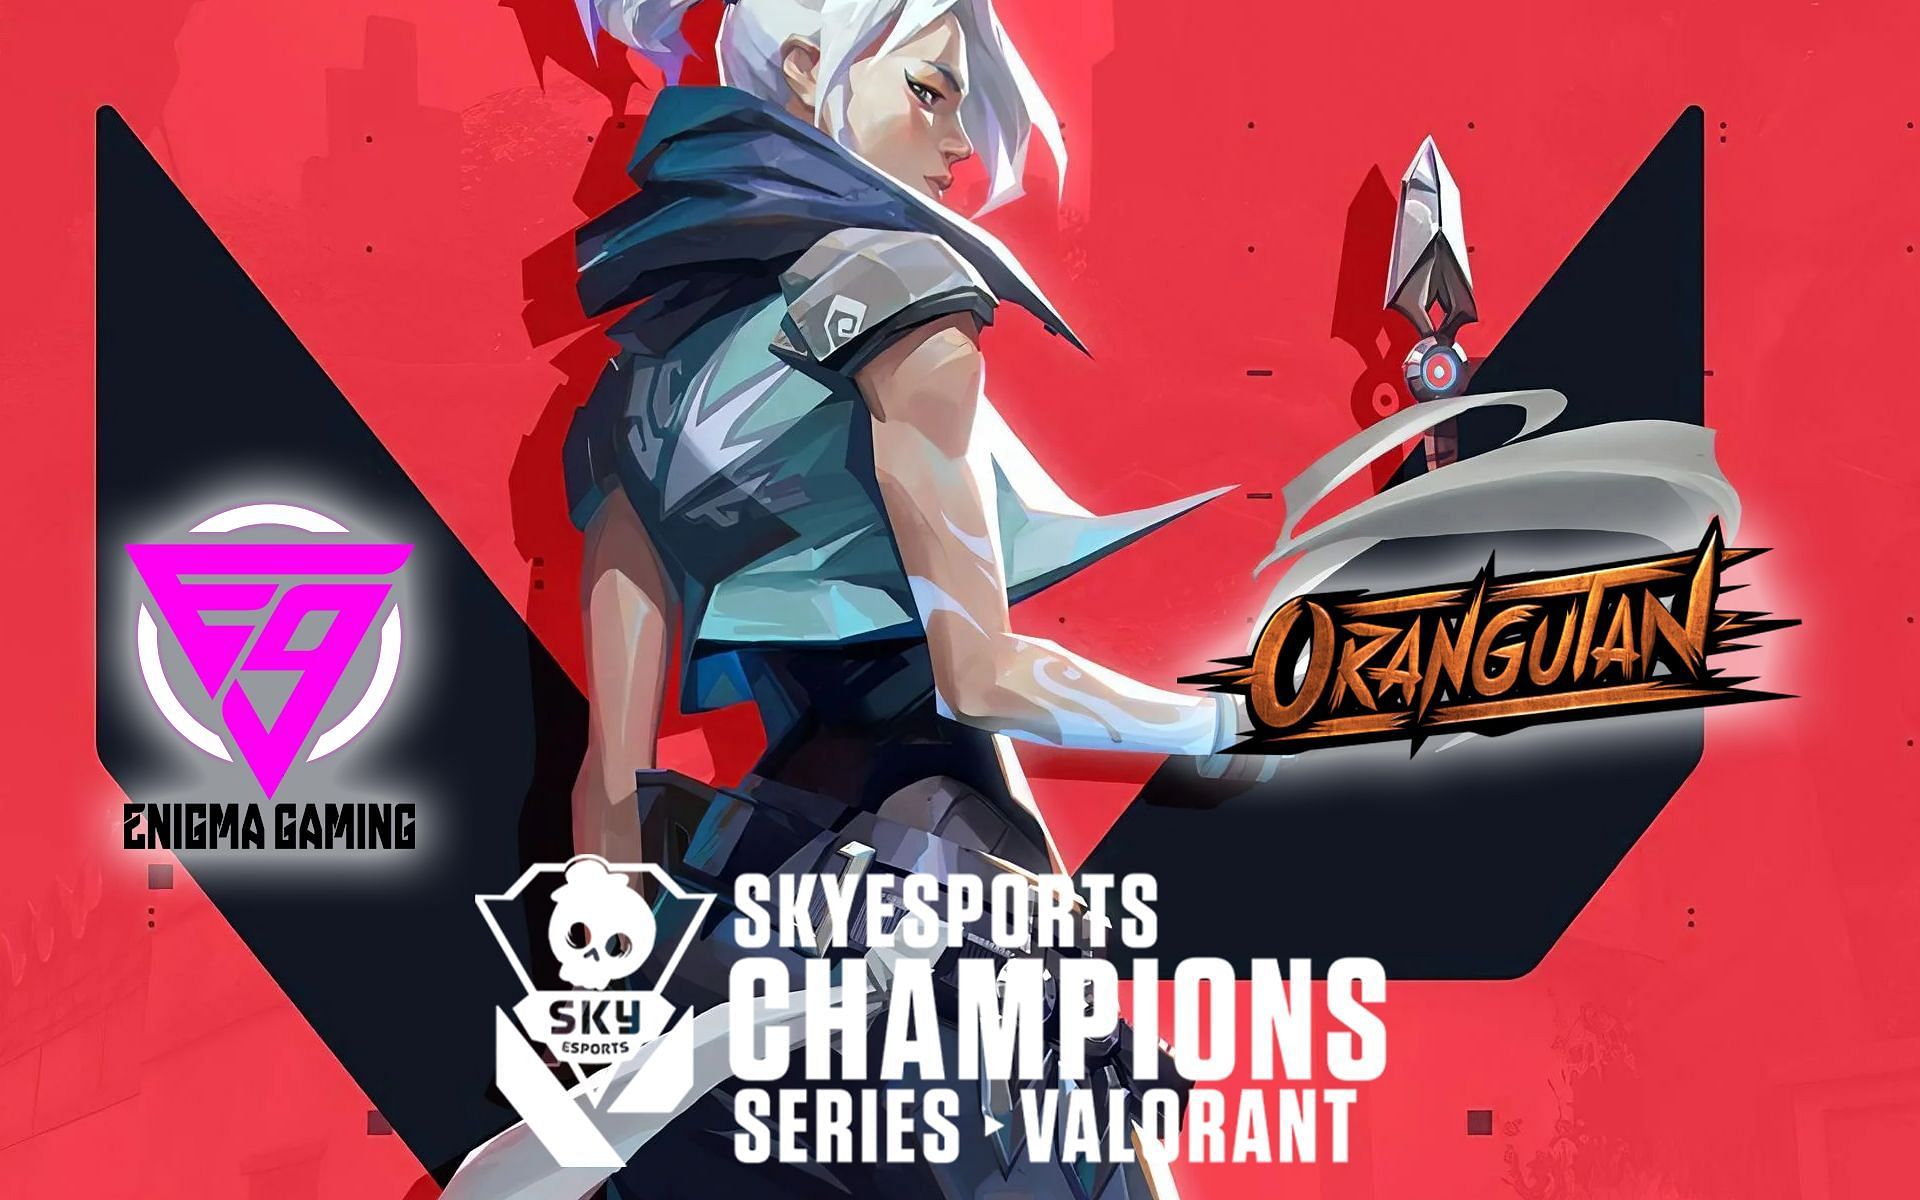 Detailed report on what happened at AMD Skyesports Champion Series Valorant tournament&#039;s Day 2 (Image by Sportskeeda)